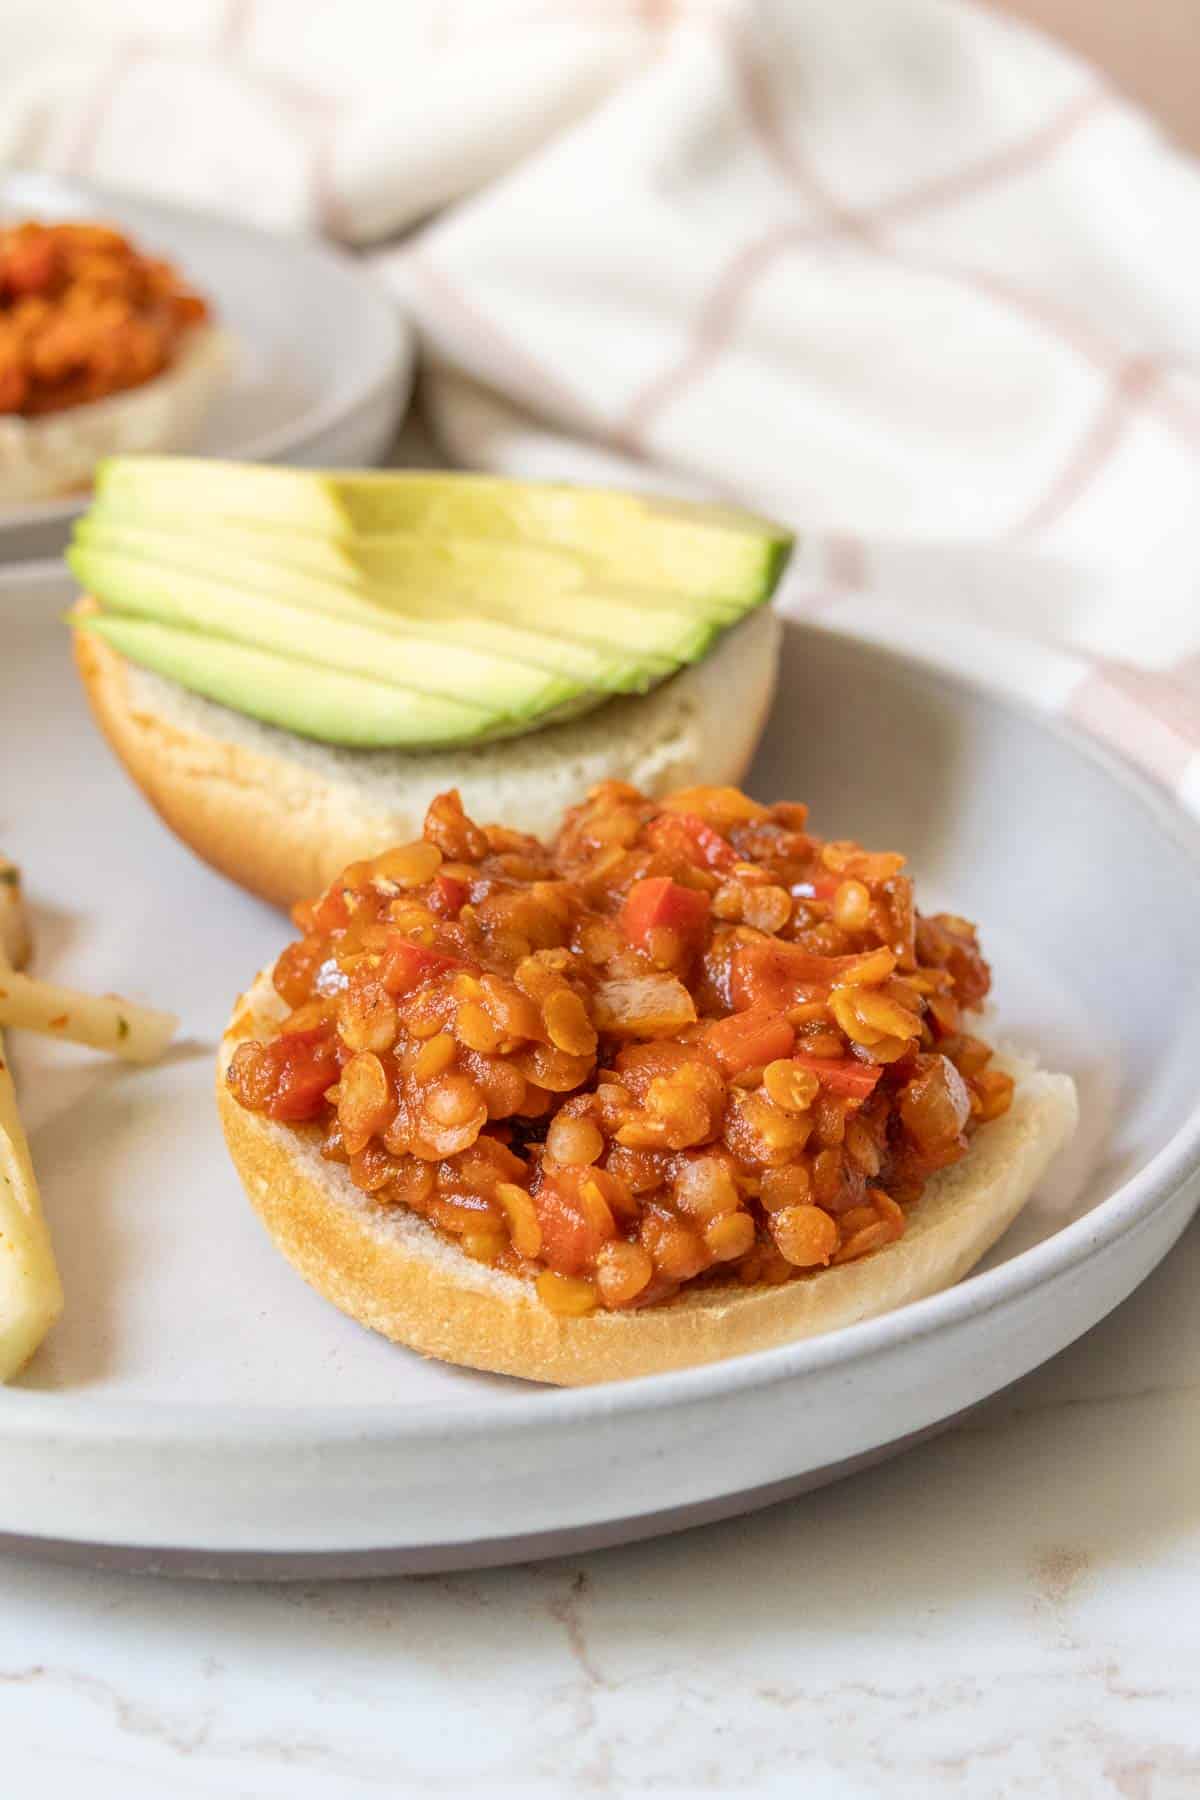 A plate with a sandwich with lentils and avocado on it.